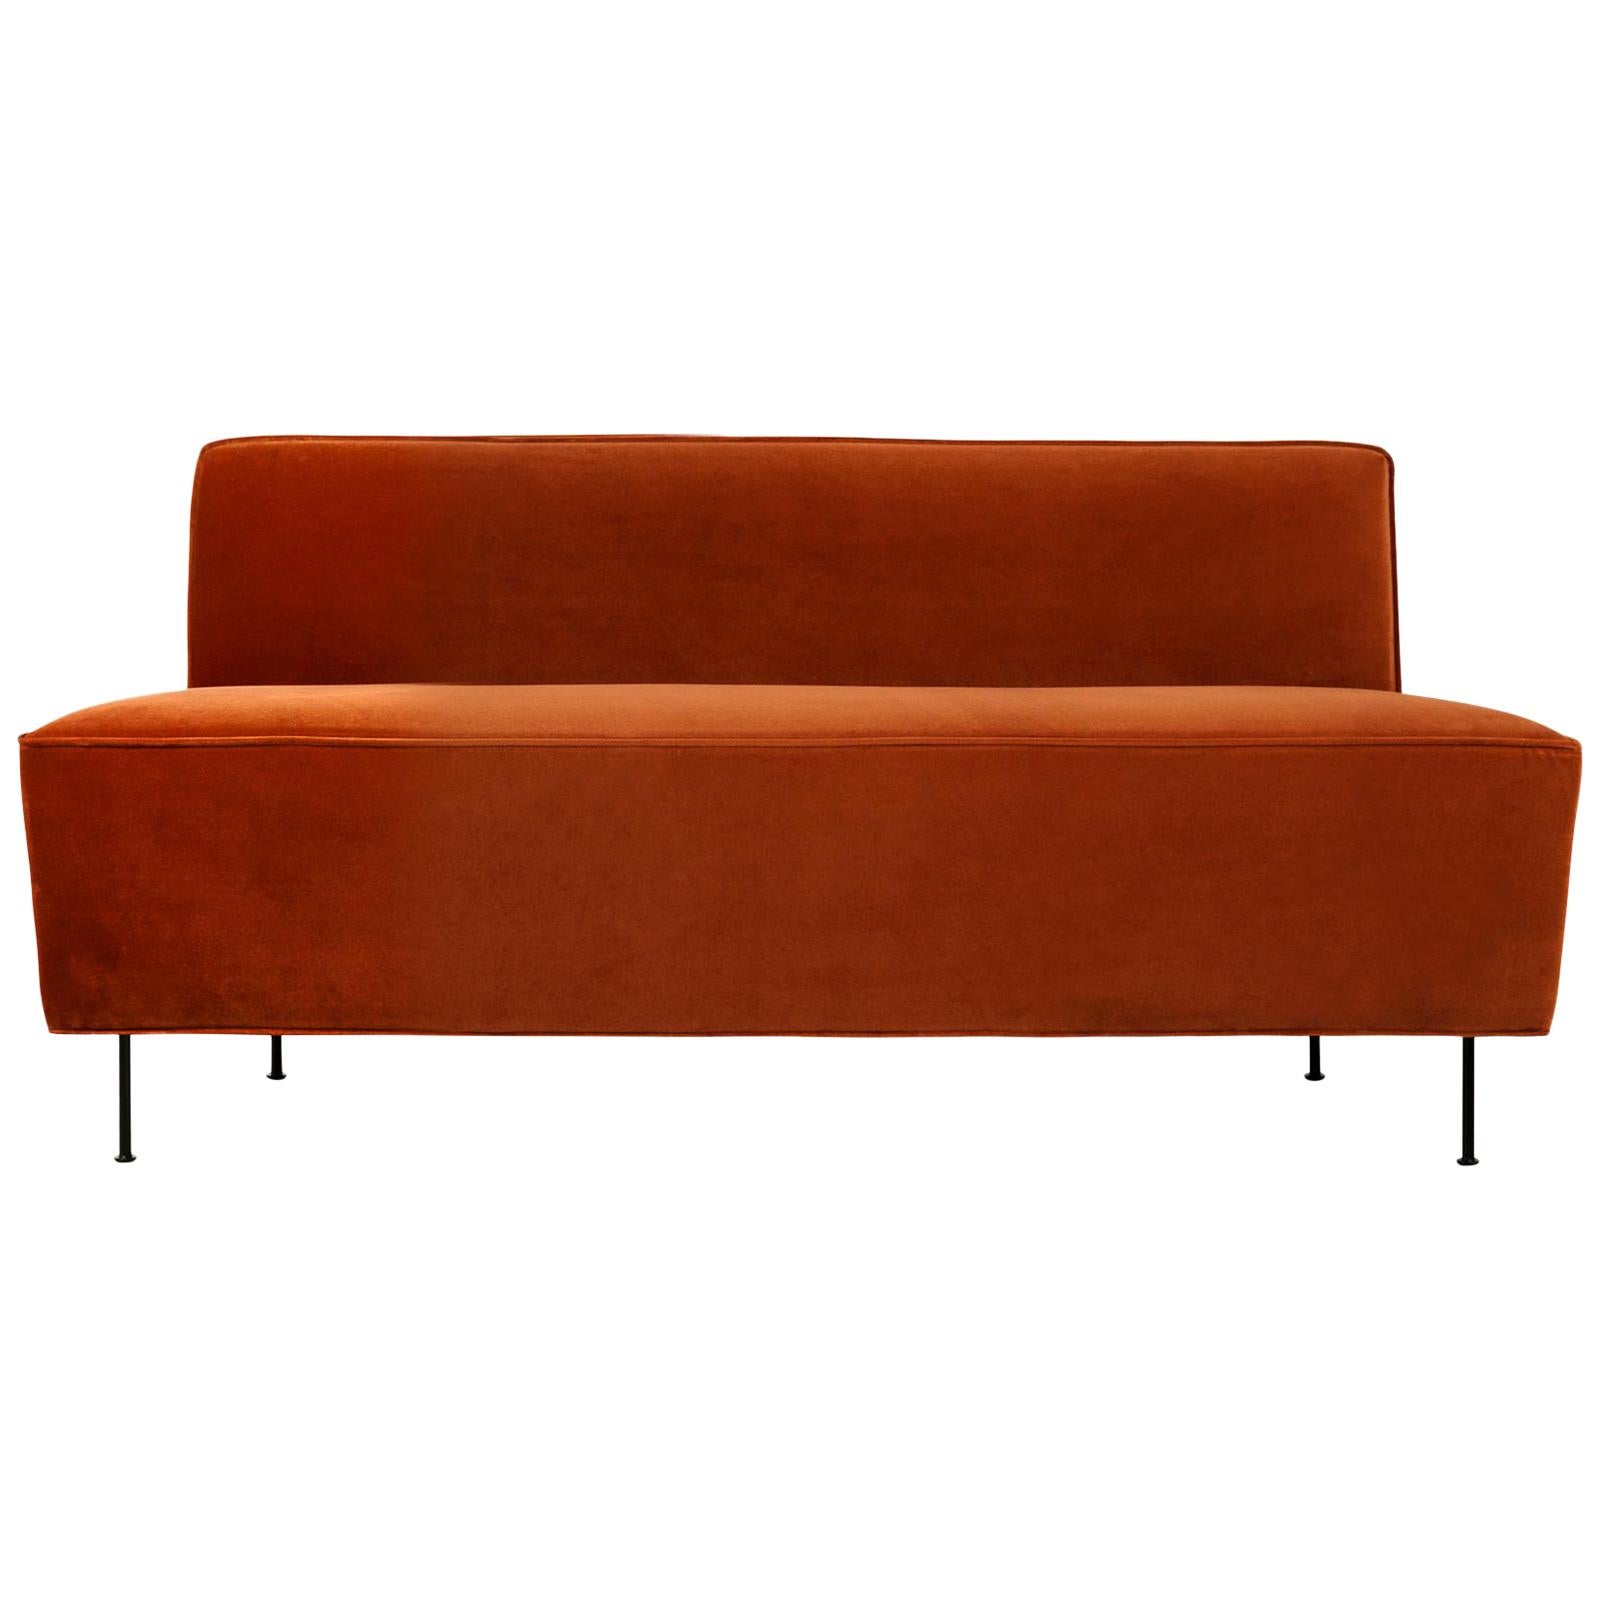 Modern Line Sofa, Dining Height, Small with Black Semi Matte Legs